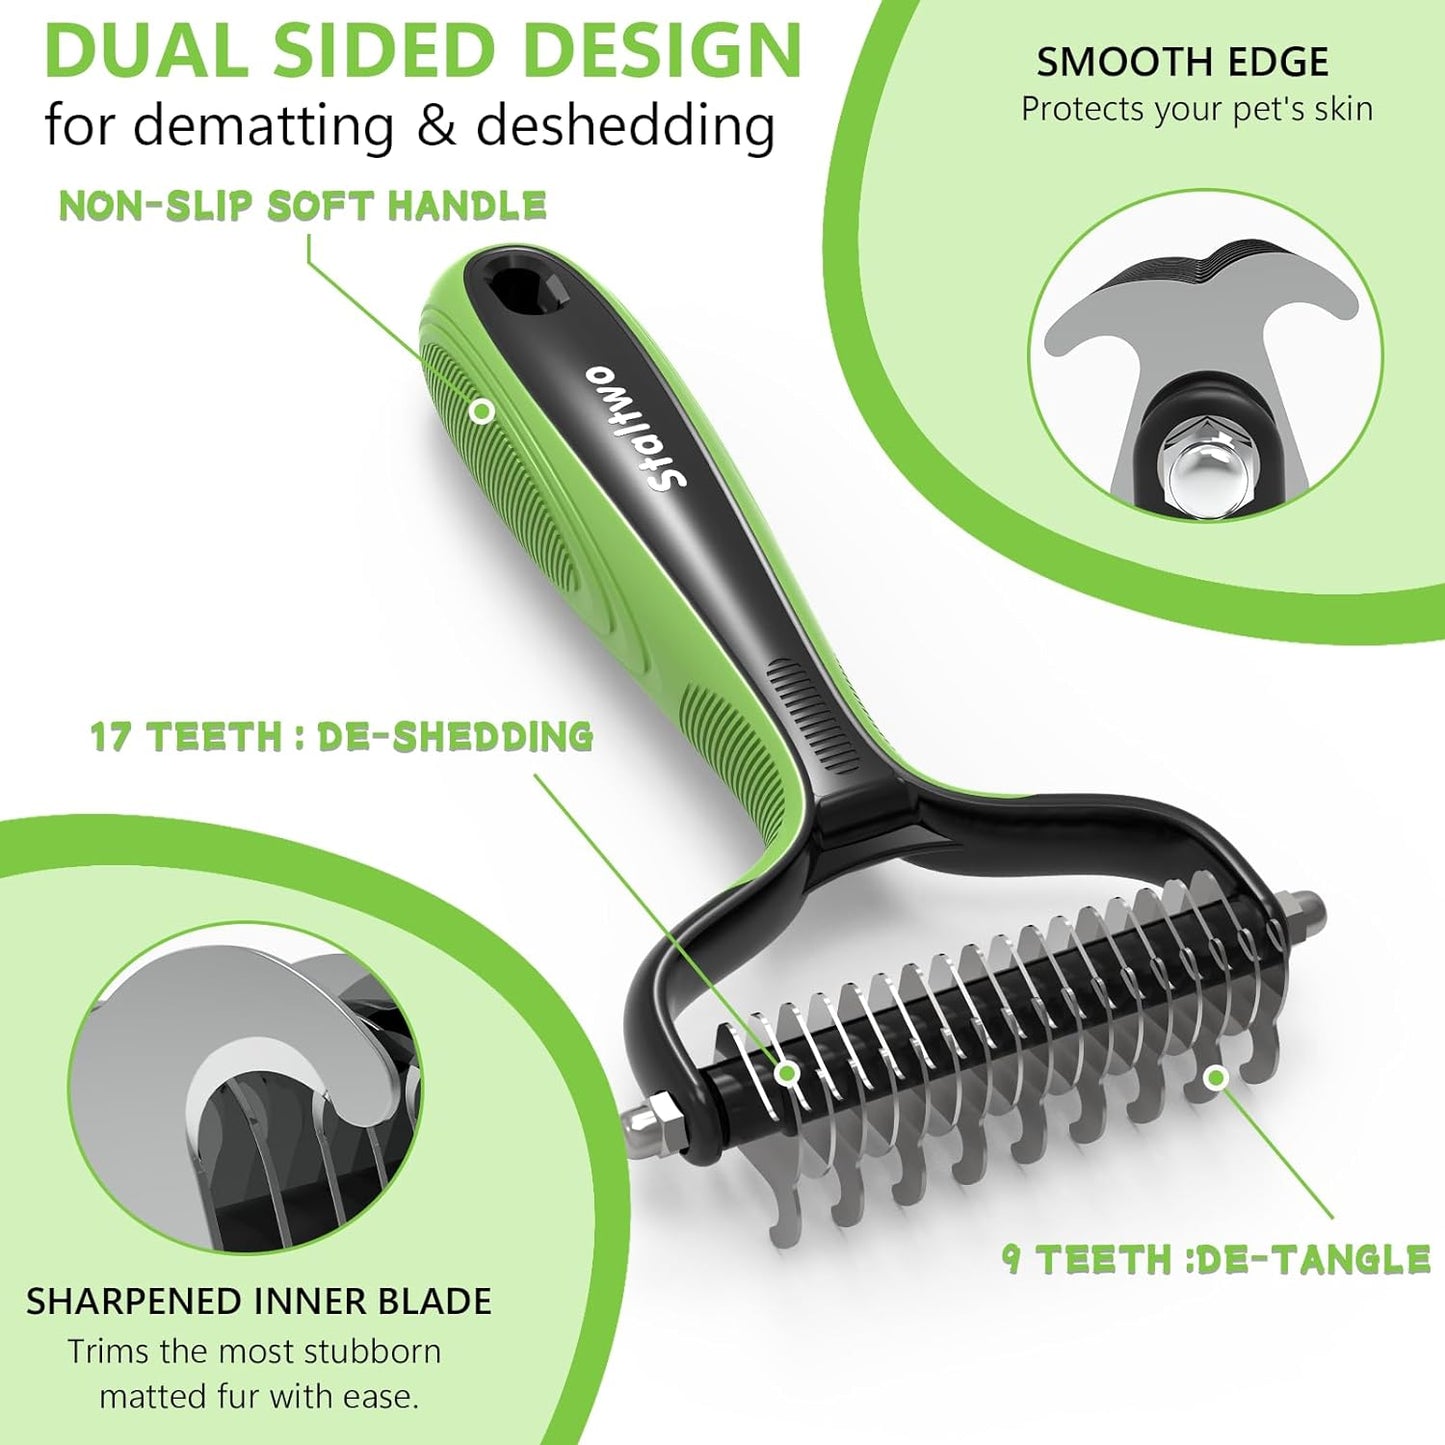 Pet Grooming Supplies - 2-in-1 Professional Undercoat Rake and Pet Brush | Shedding Control for Long Haired Dogs and Cats, Deshedding Tool, Furminator for Dogs, Green